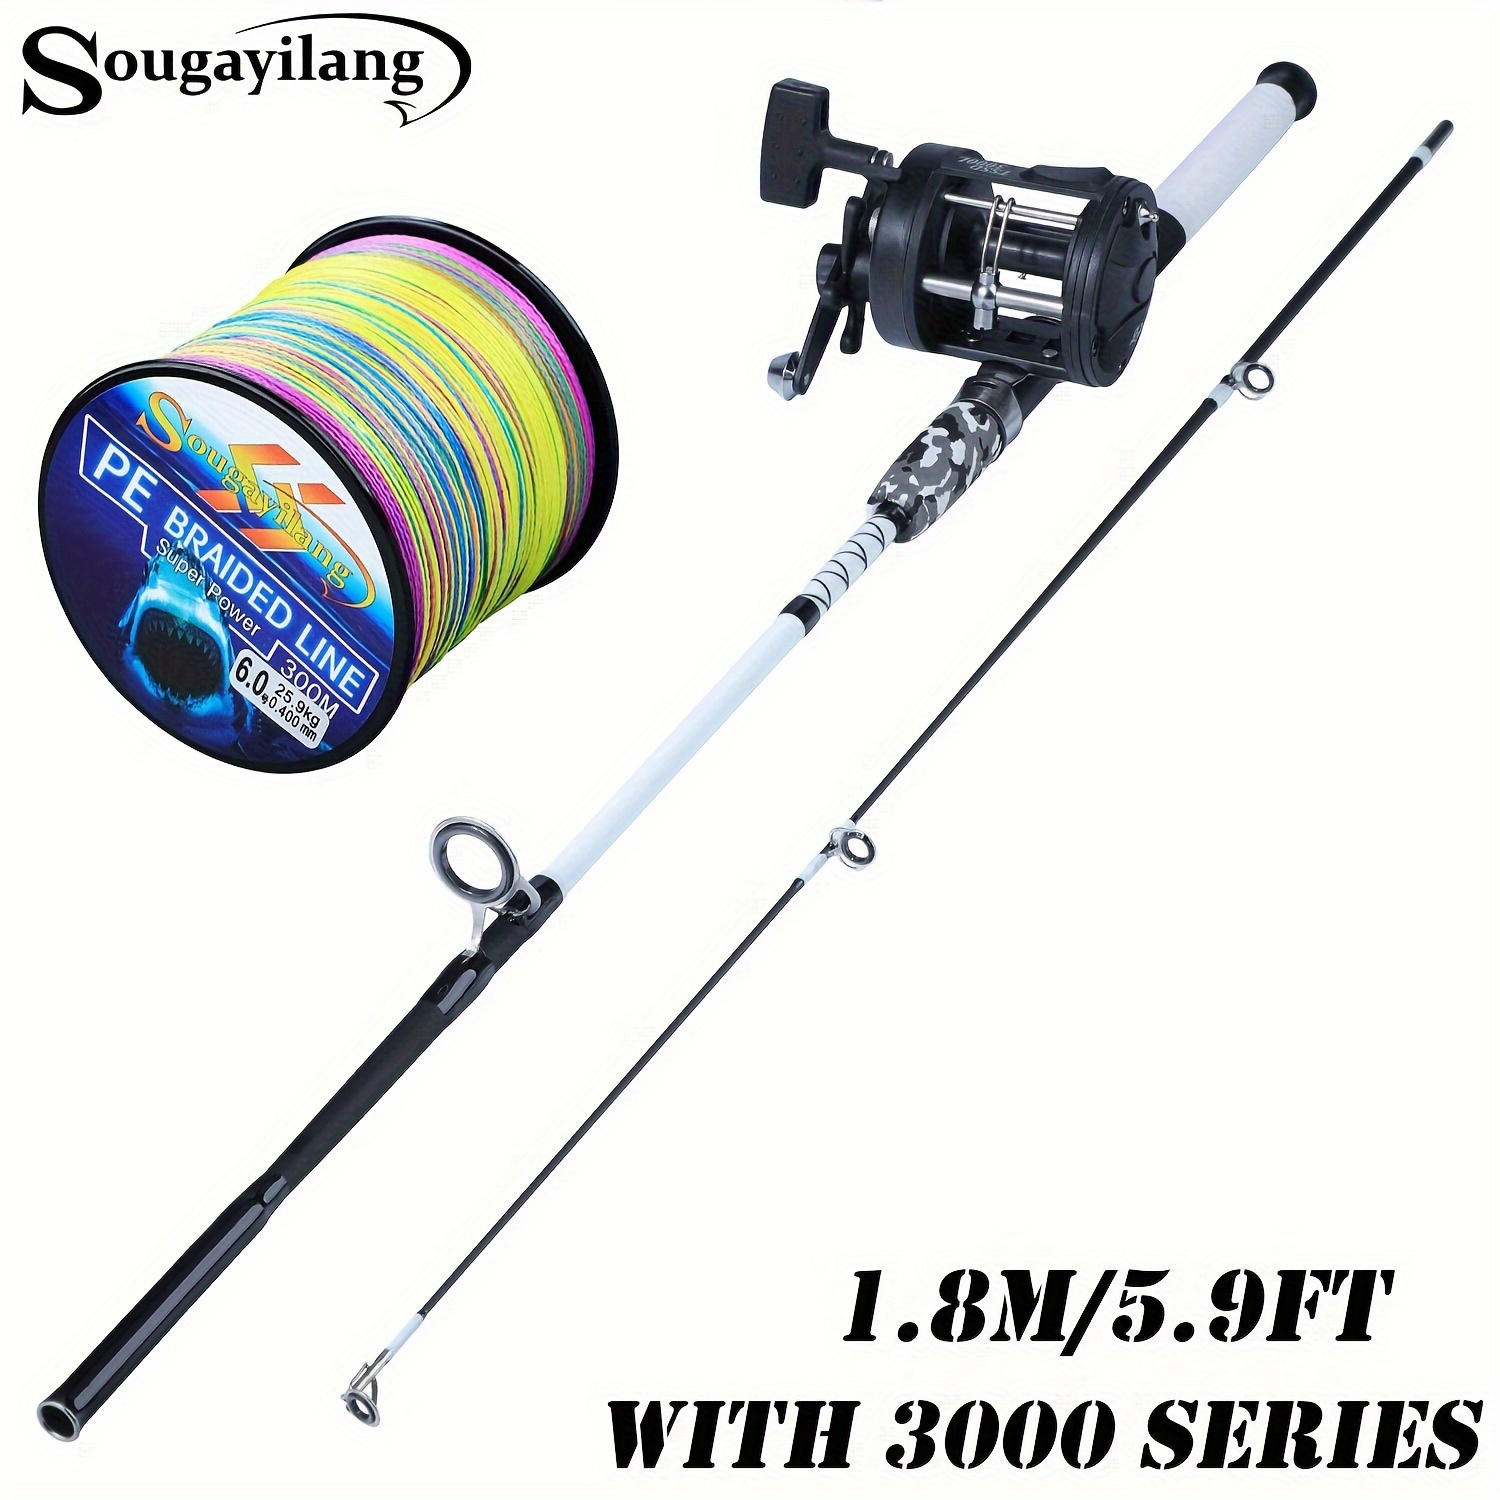 Sougayilang Right Fishing Reels for sale